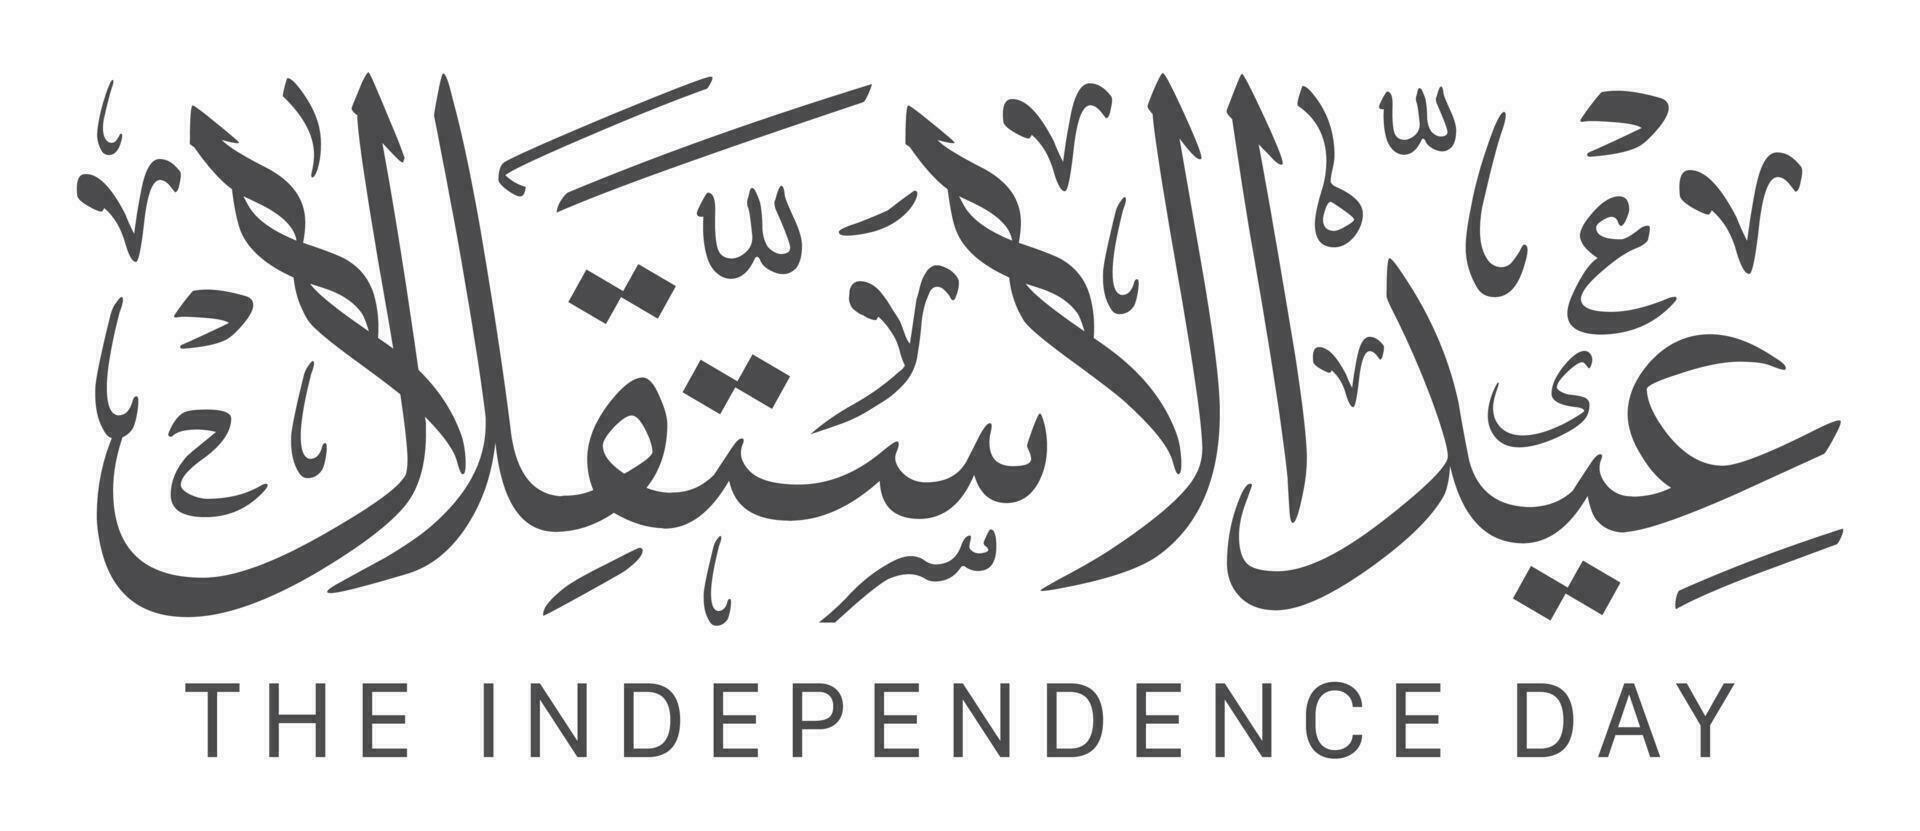 happy independence day greeting typography calligraphy text vector illustration. Translation The independence day.